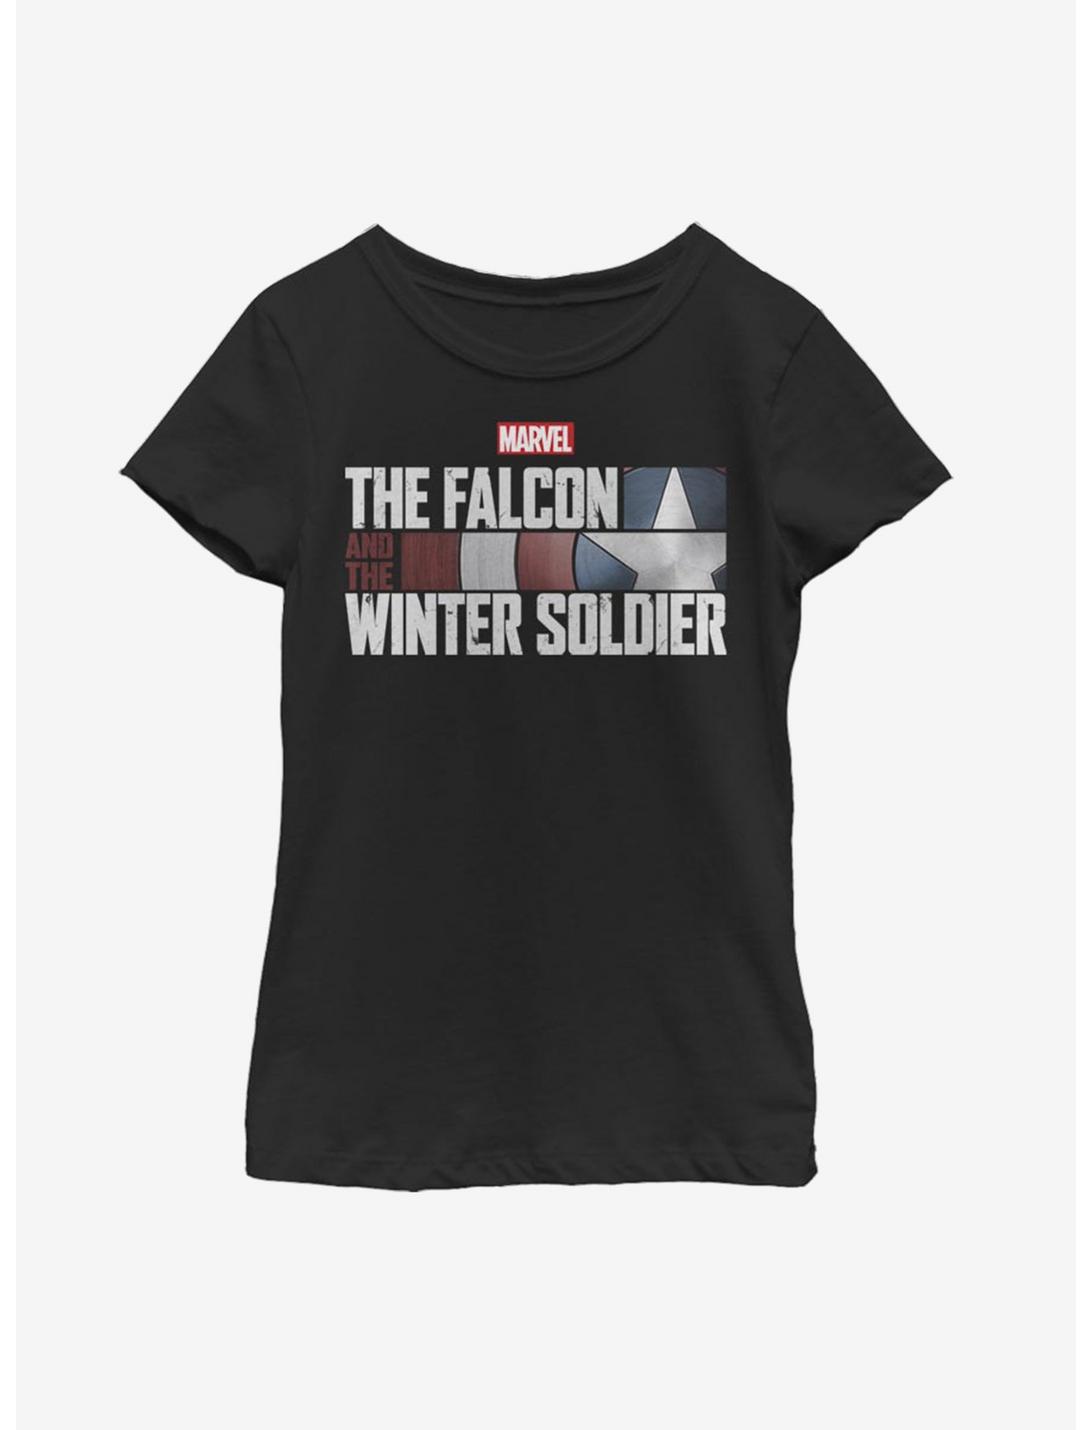 Marvel The Falcon And The Winter Soldier Youth Girls T-Shirt, BLACK, hi-res